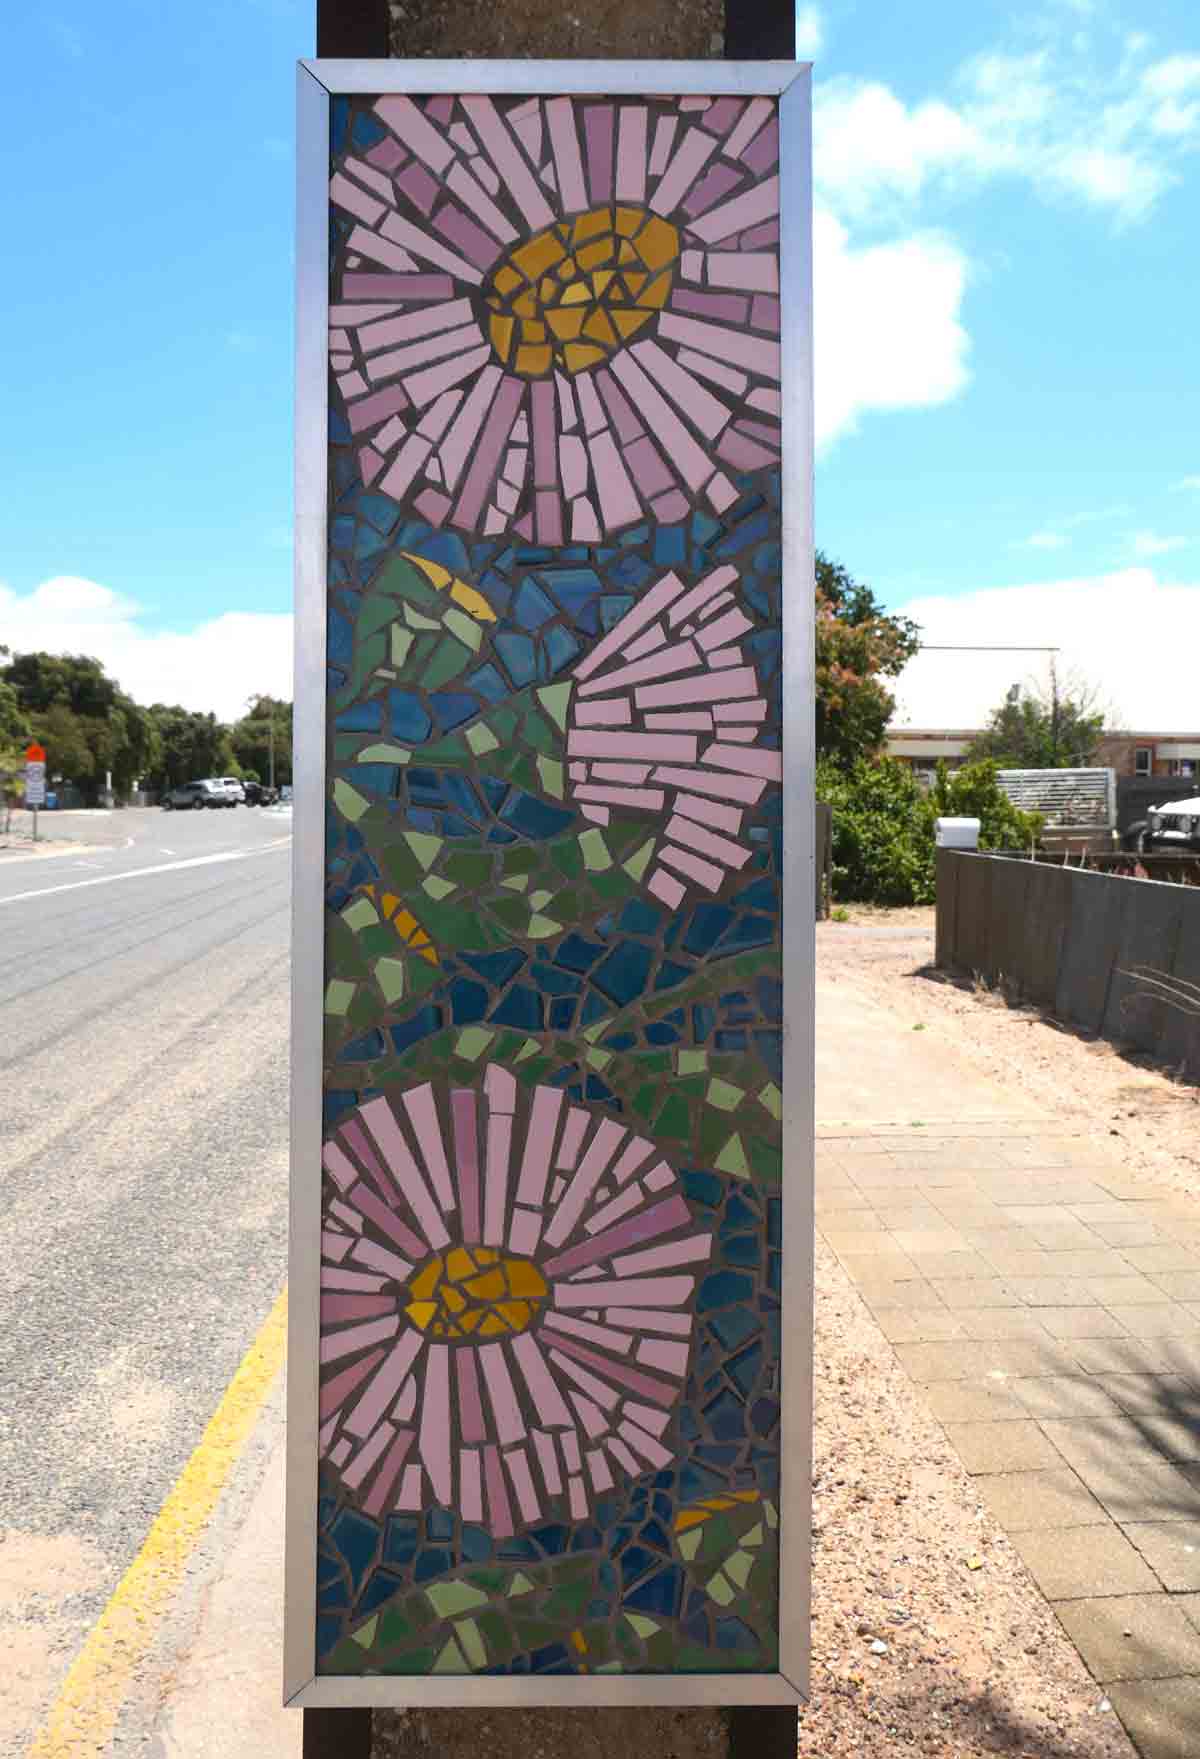 Mosaic Art on some of the street lights. Located in Tumby Bay, Eyre Peninsula, South Australia.